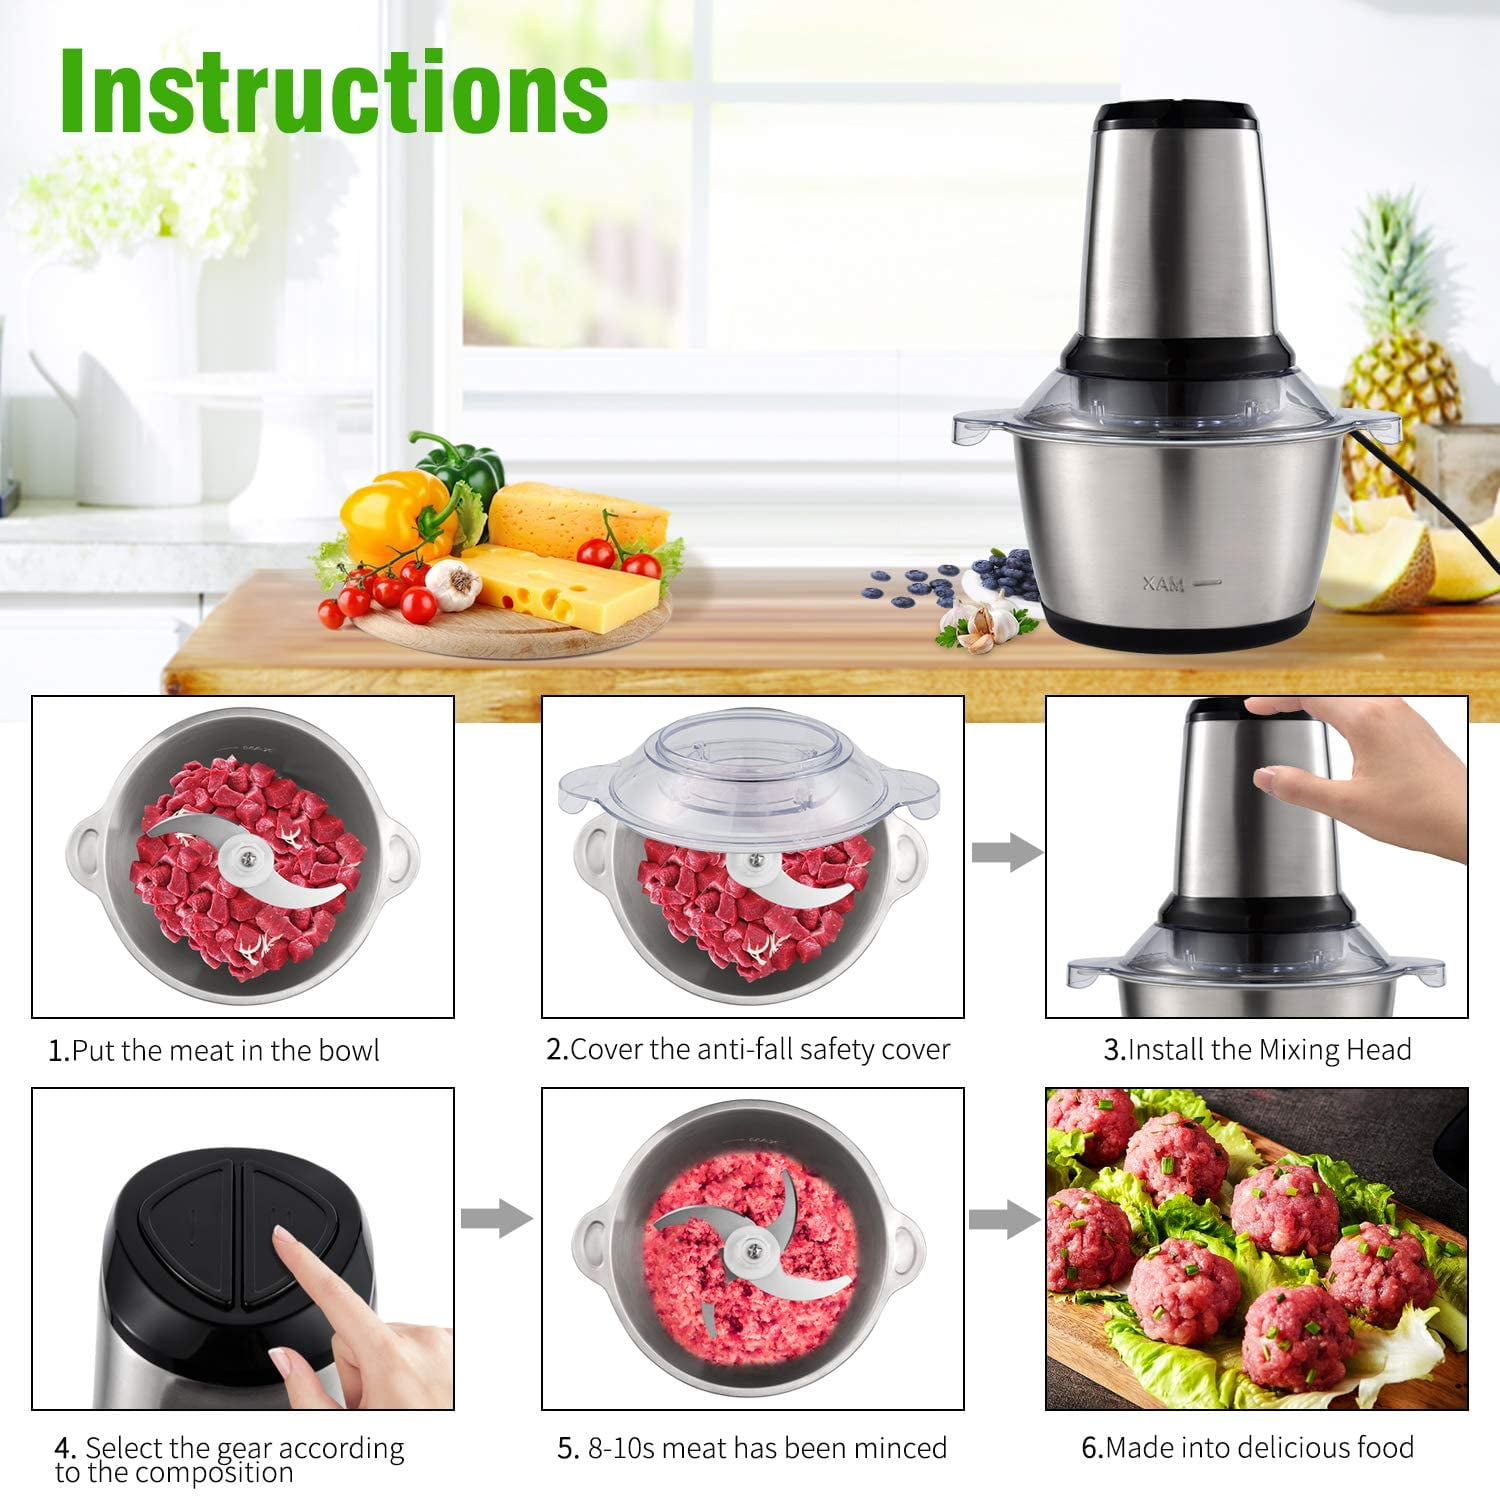  Reemix 1.5-Cup One-Touch Electric Food Chopper, 100W Mini Food  Processor Meat Grinder, Mix, Chop, Mince and Blend Vegetables, Fruits,  Nuts, Meats, Stainless Steel Blade (Silver): Home & Kitchen